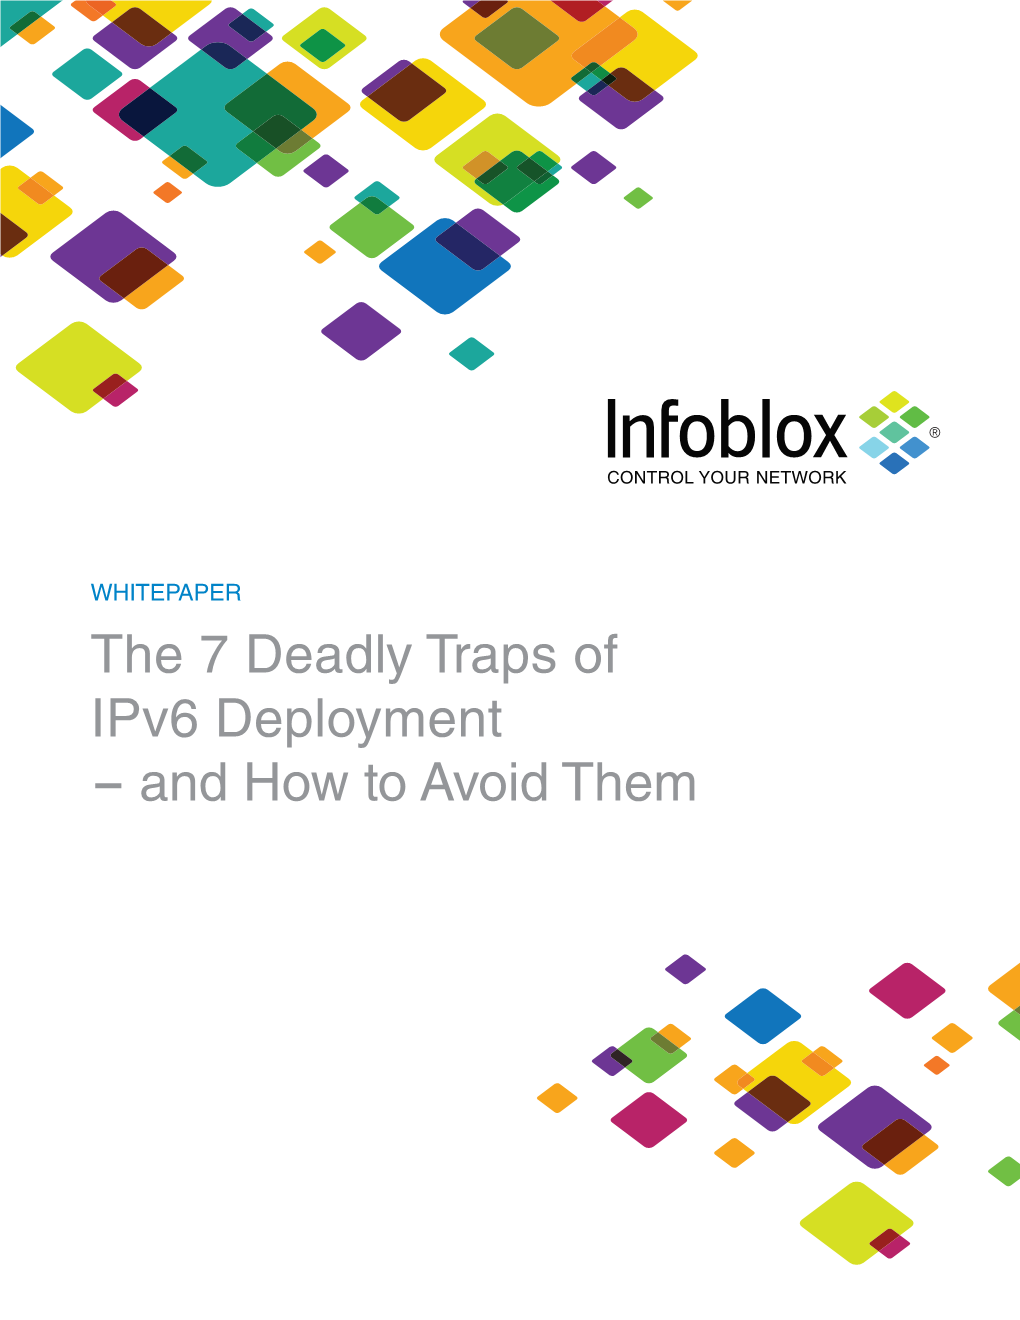 The 7 Deadly Traps of Ipv6 Deployment - and How to Avoid Them the 7 Deadly Traps of Ipv6 Deployment - and How to Avoid Them